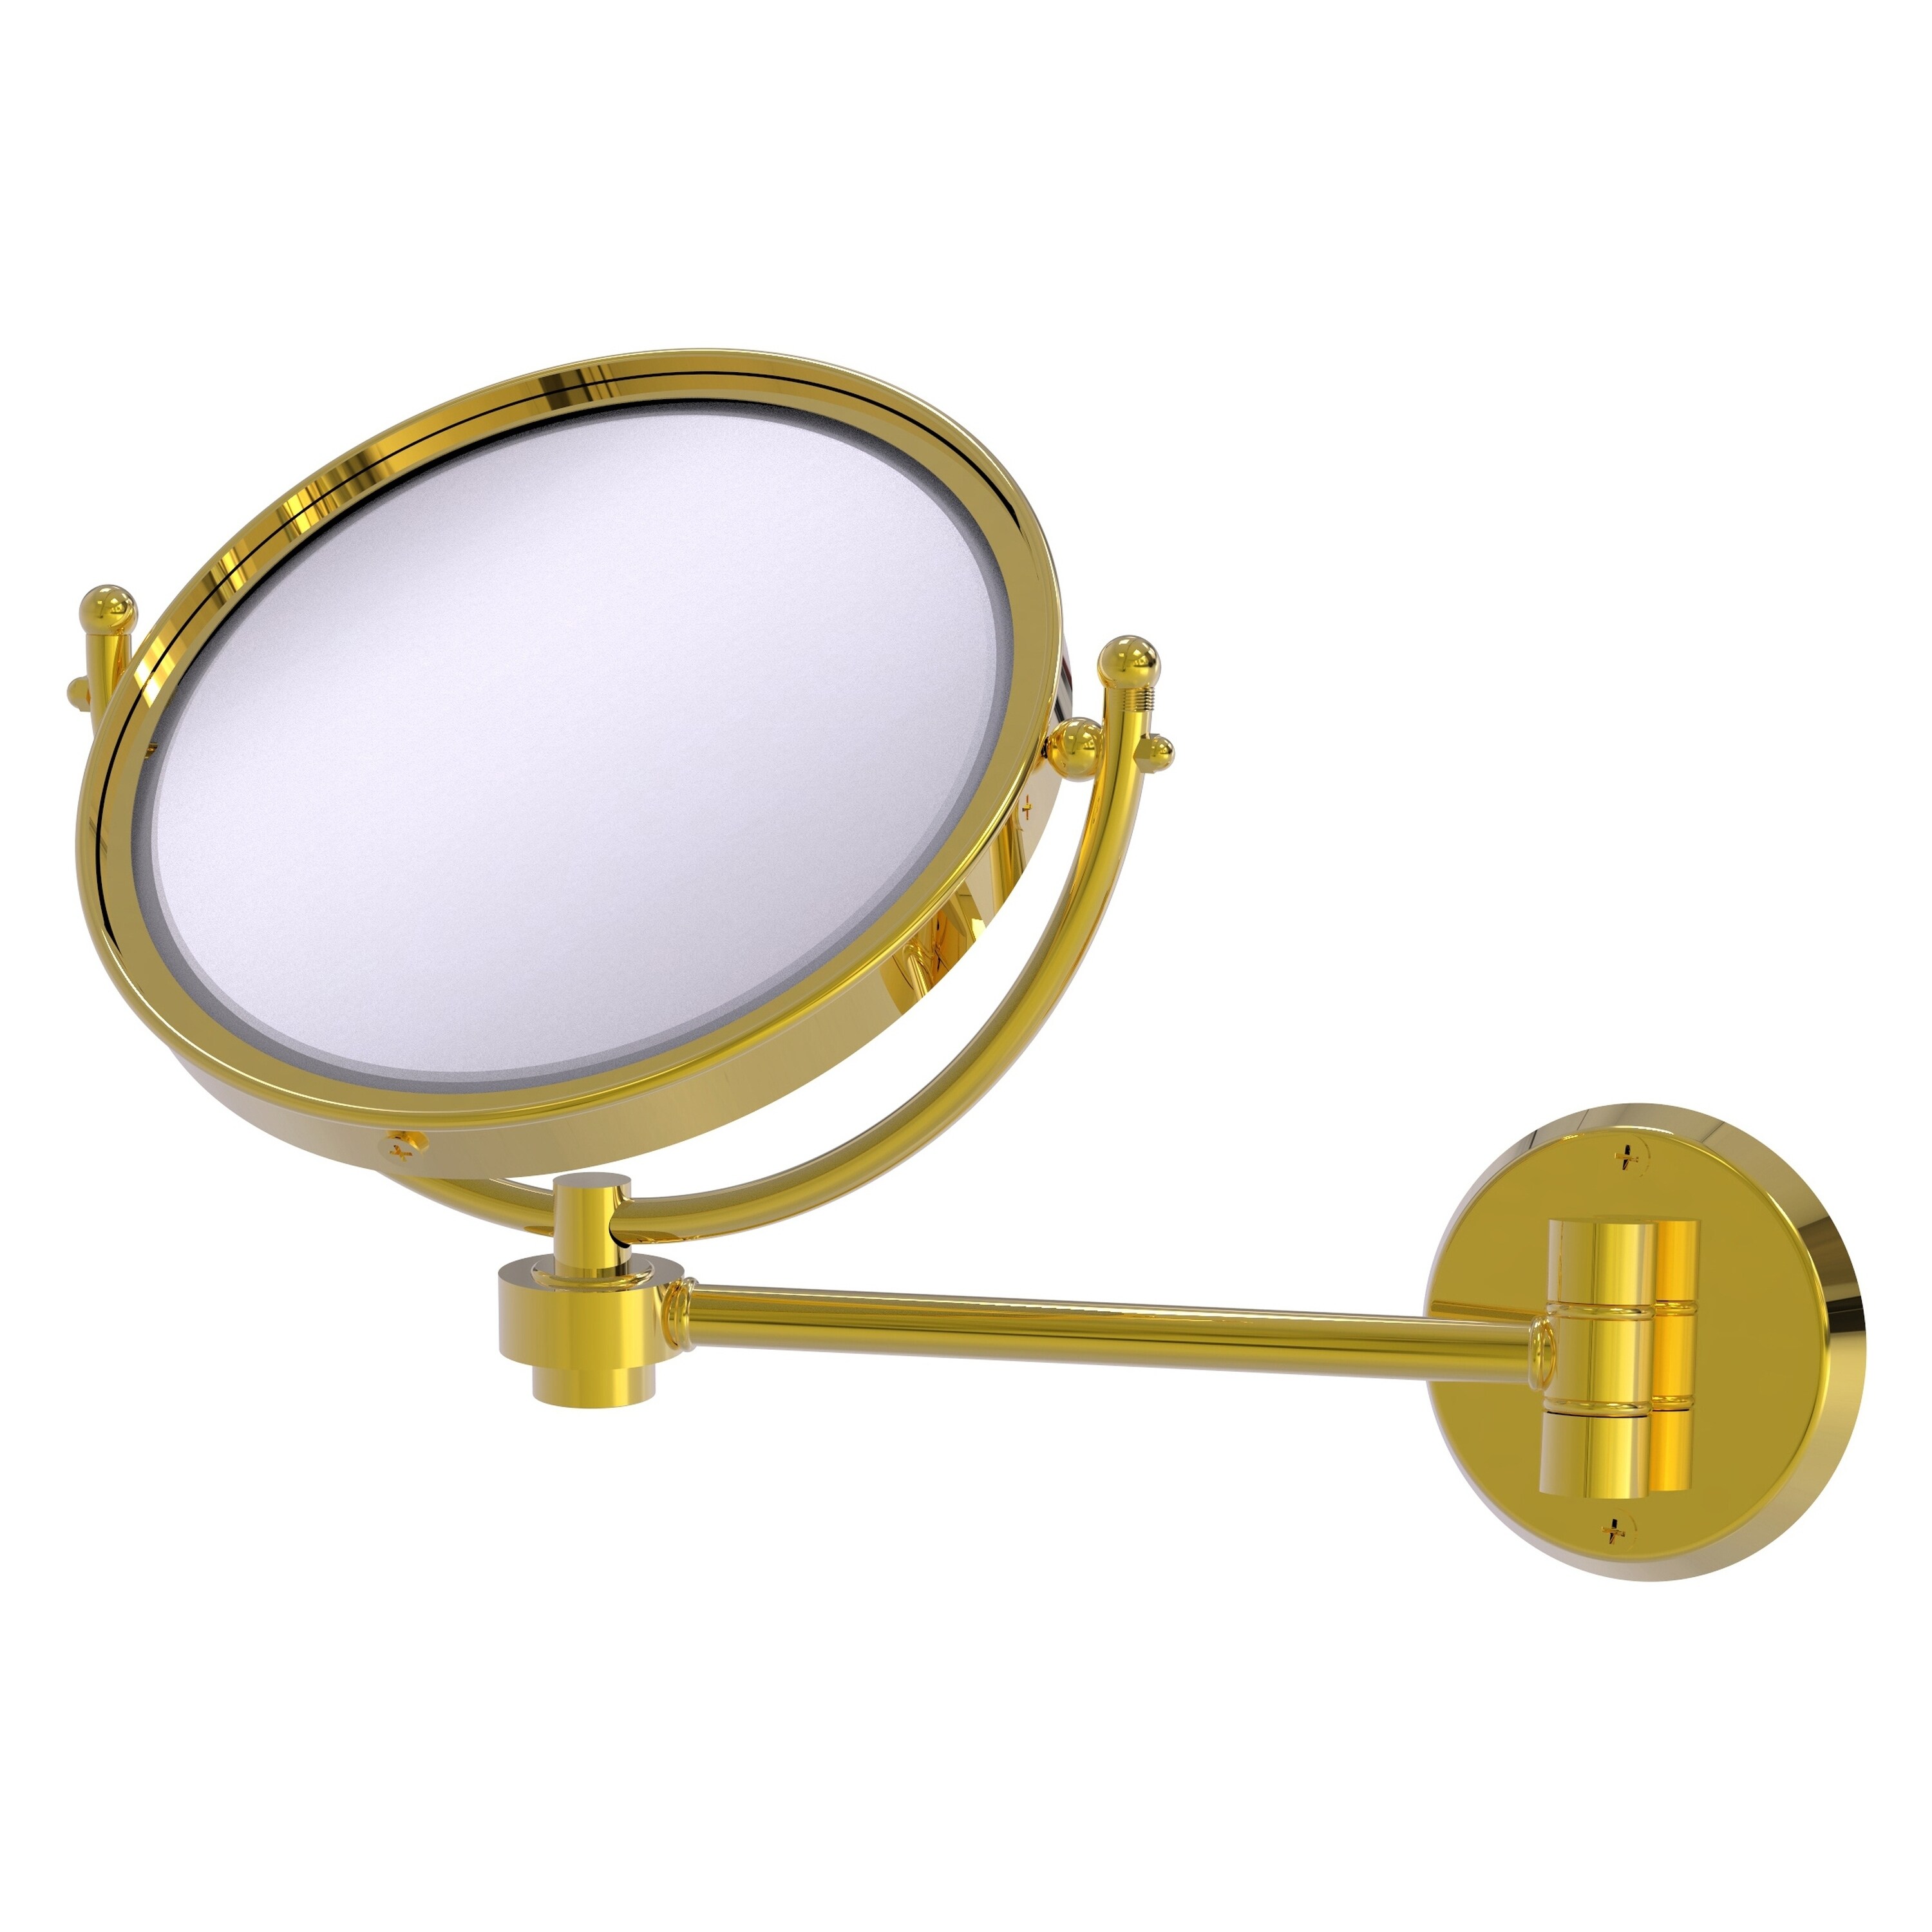 8-in x 10-in Polished Silver Double-sided 5X Magnifying Wall-mounted Vanity Mirror | - Allied Brass WM-5/4X-PB